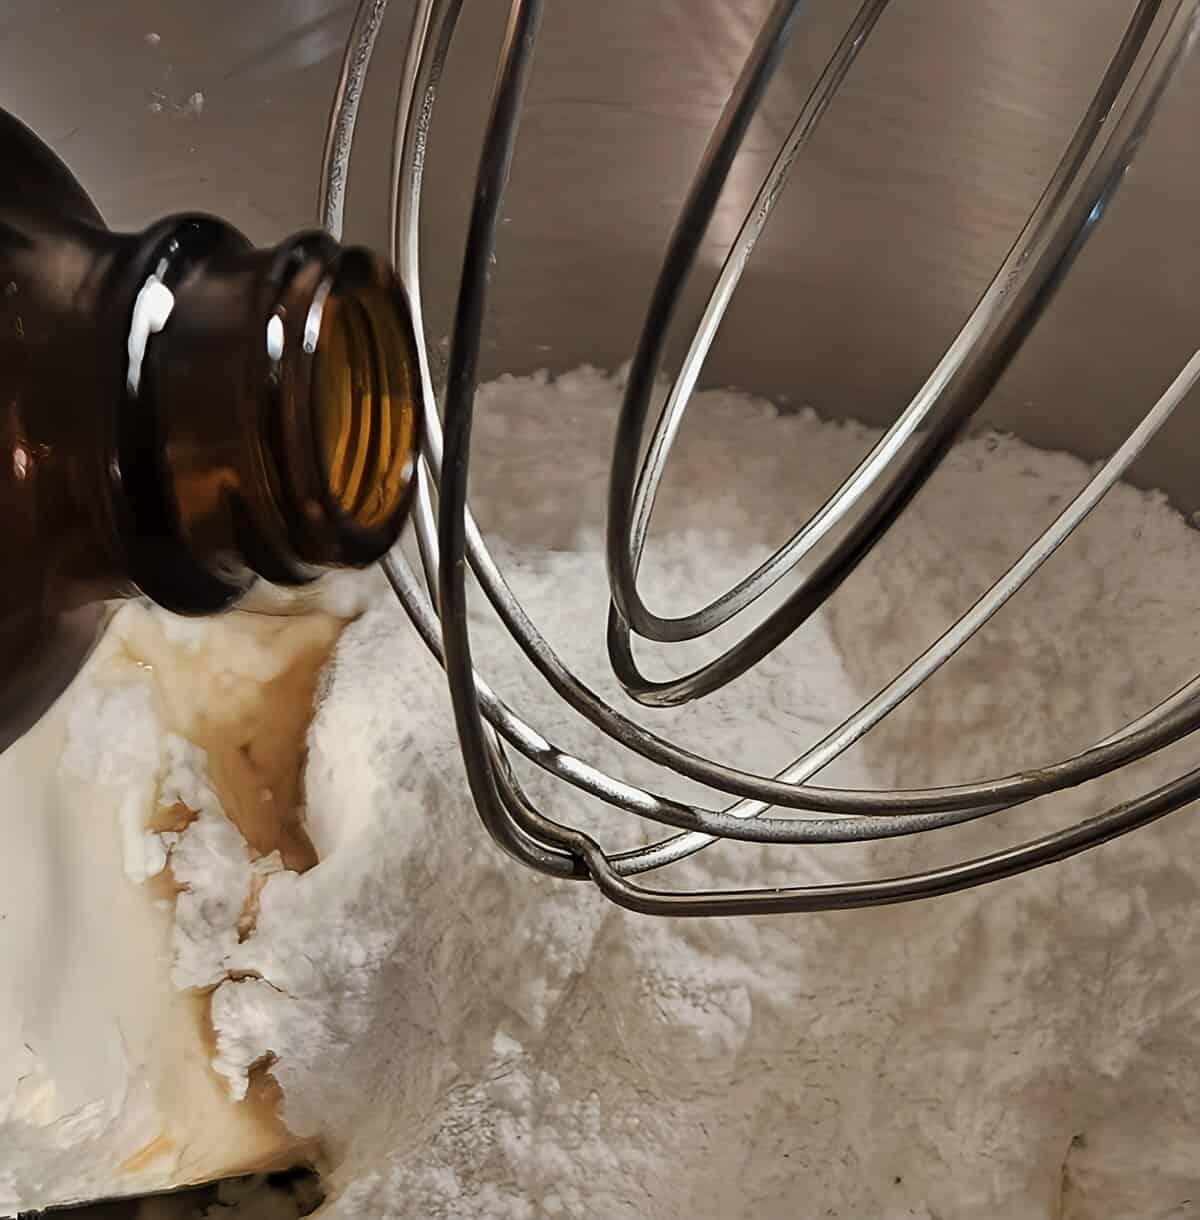 assembly of cream cheese filling for pumpkin whoopie pies; inside of mixer bowl with powdered sugar, cream cheese, butter, and vanilla extract being poured in